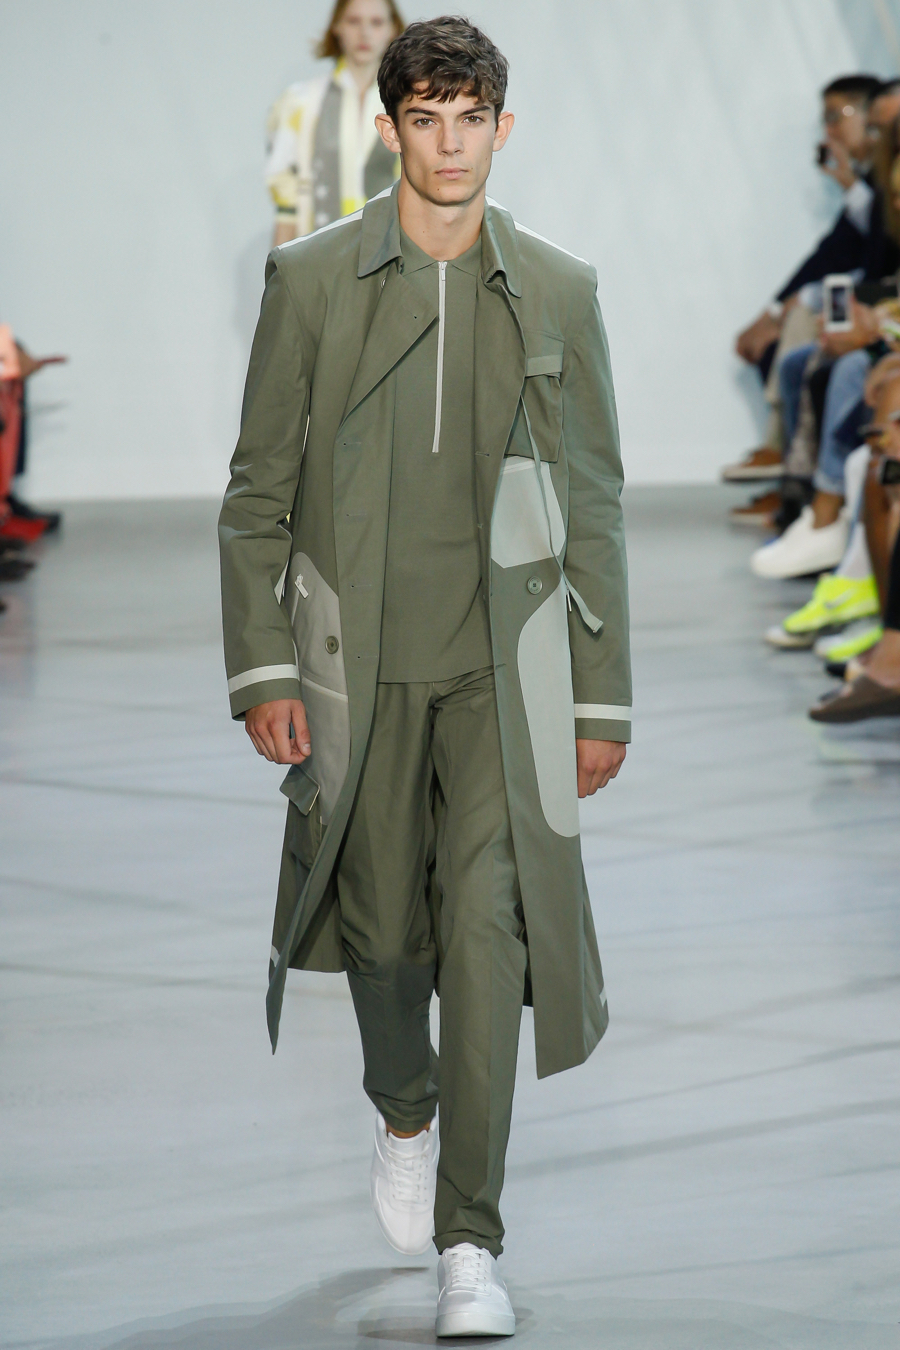 Lacoste Spring Summer 2016 Menswear Collection New York Fashion Week 016